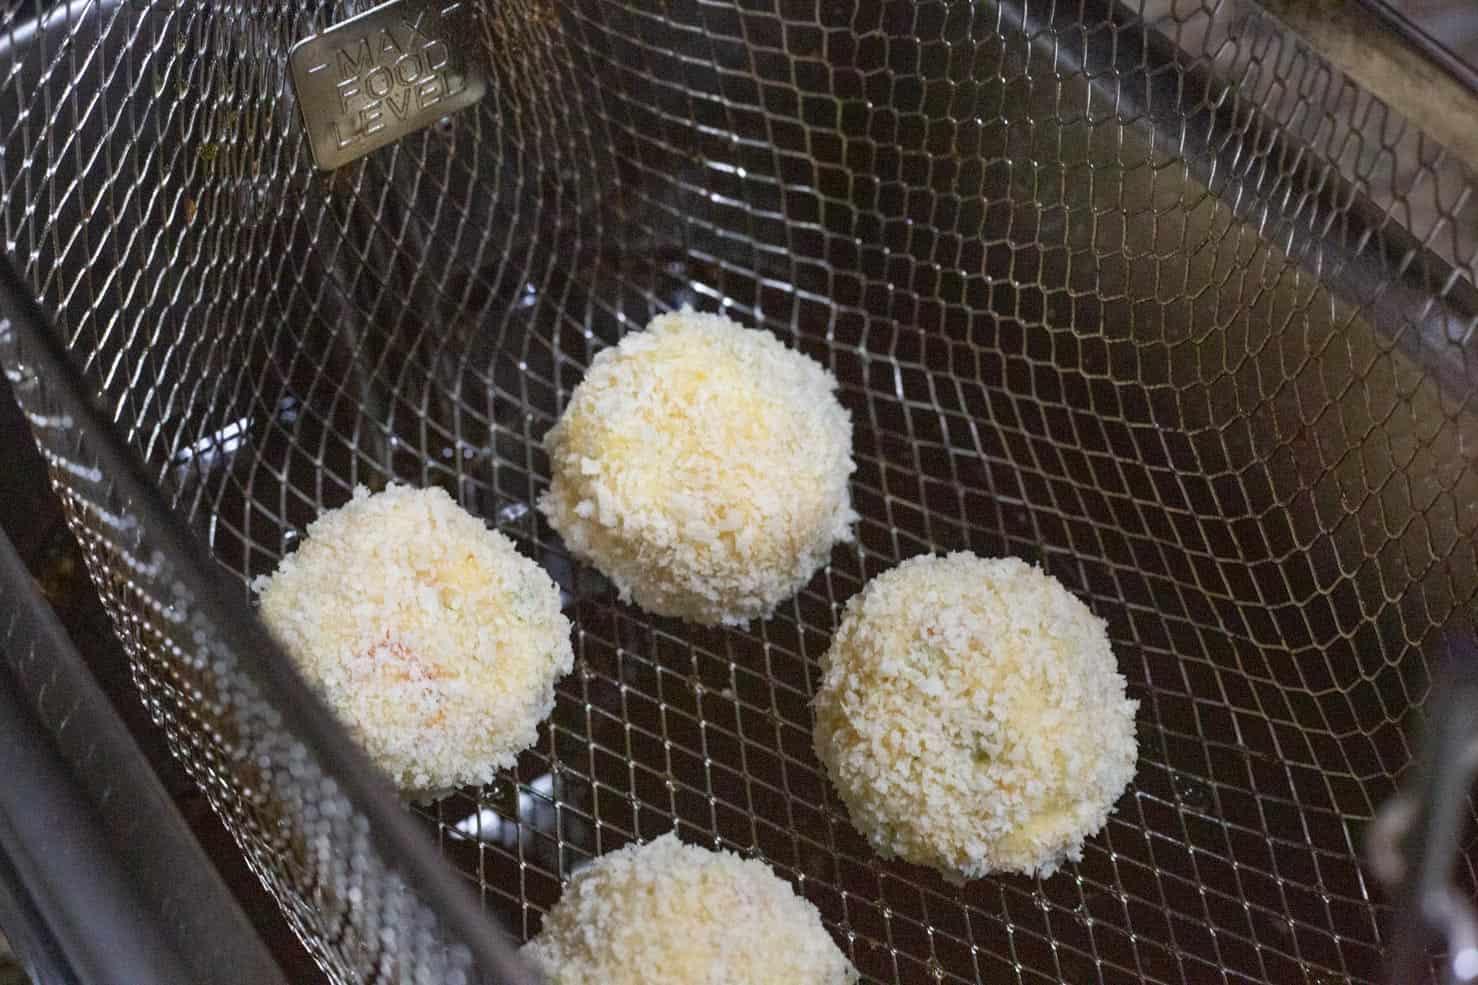 Uncooked crab balls in the basket of the fryer.